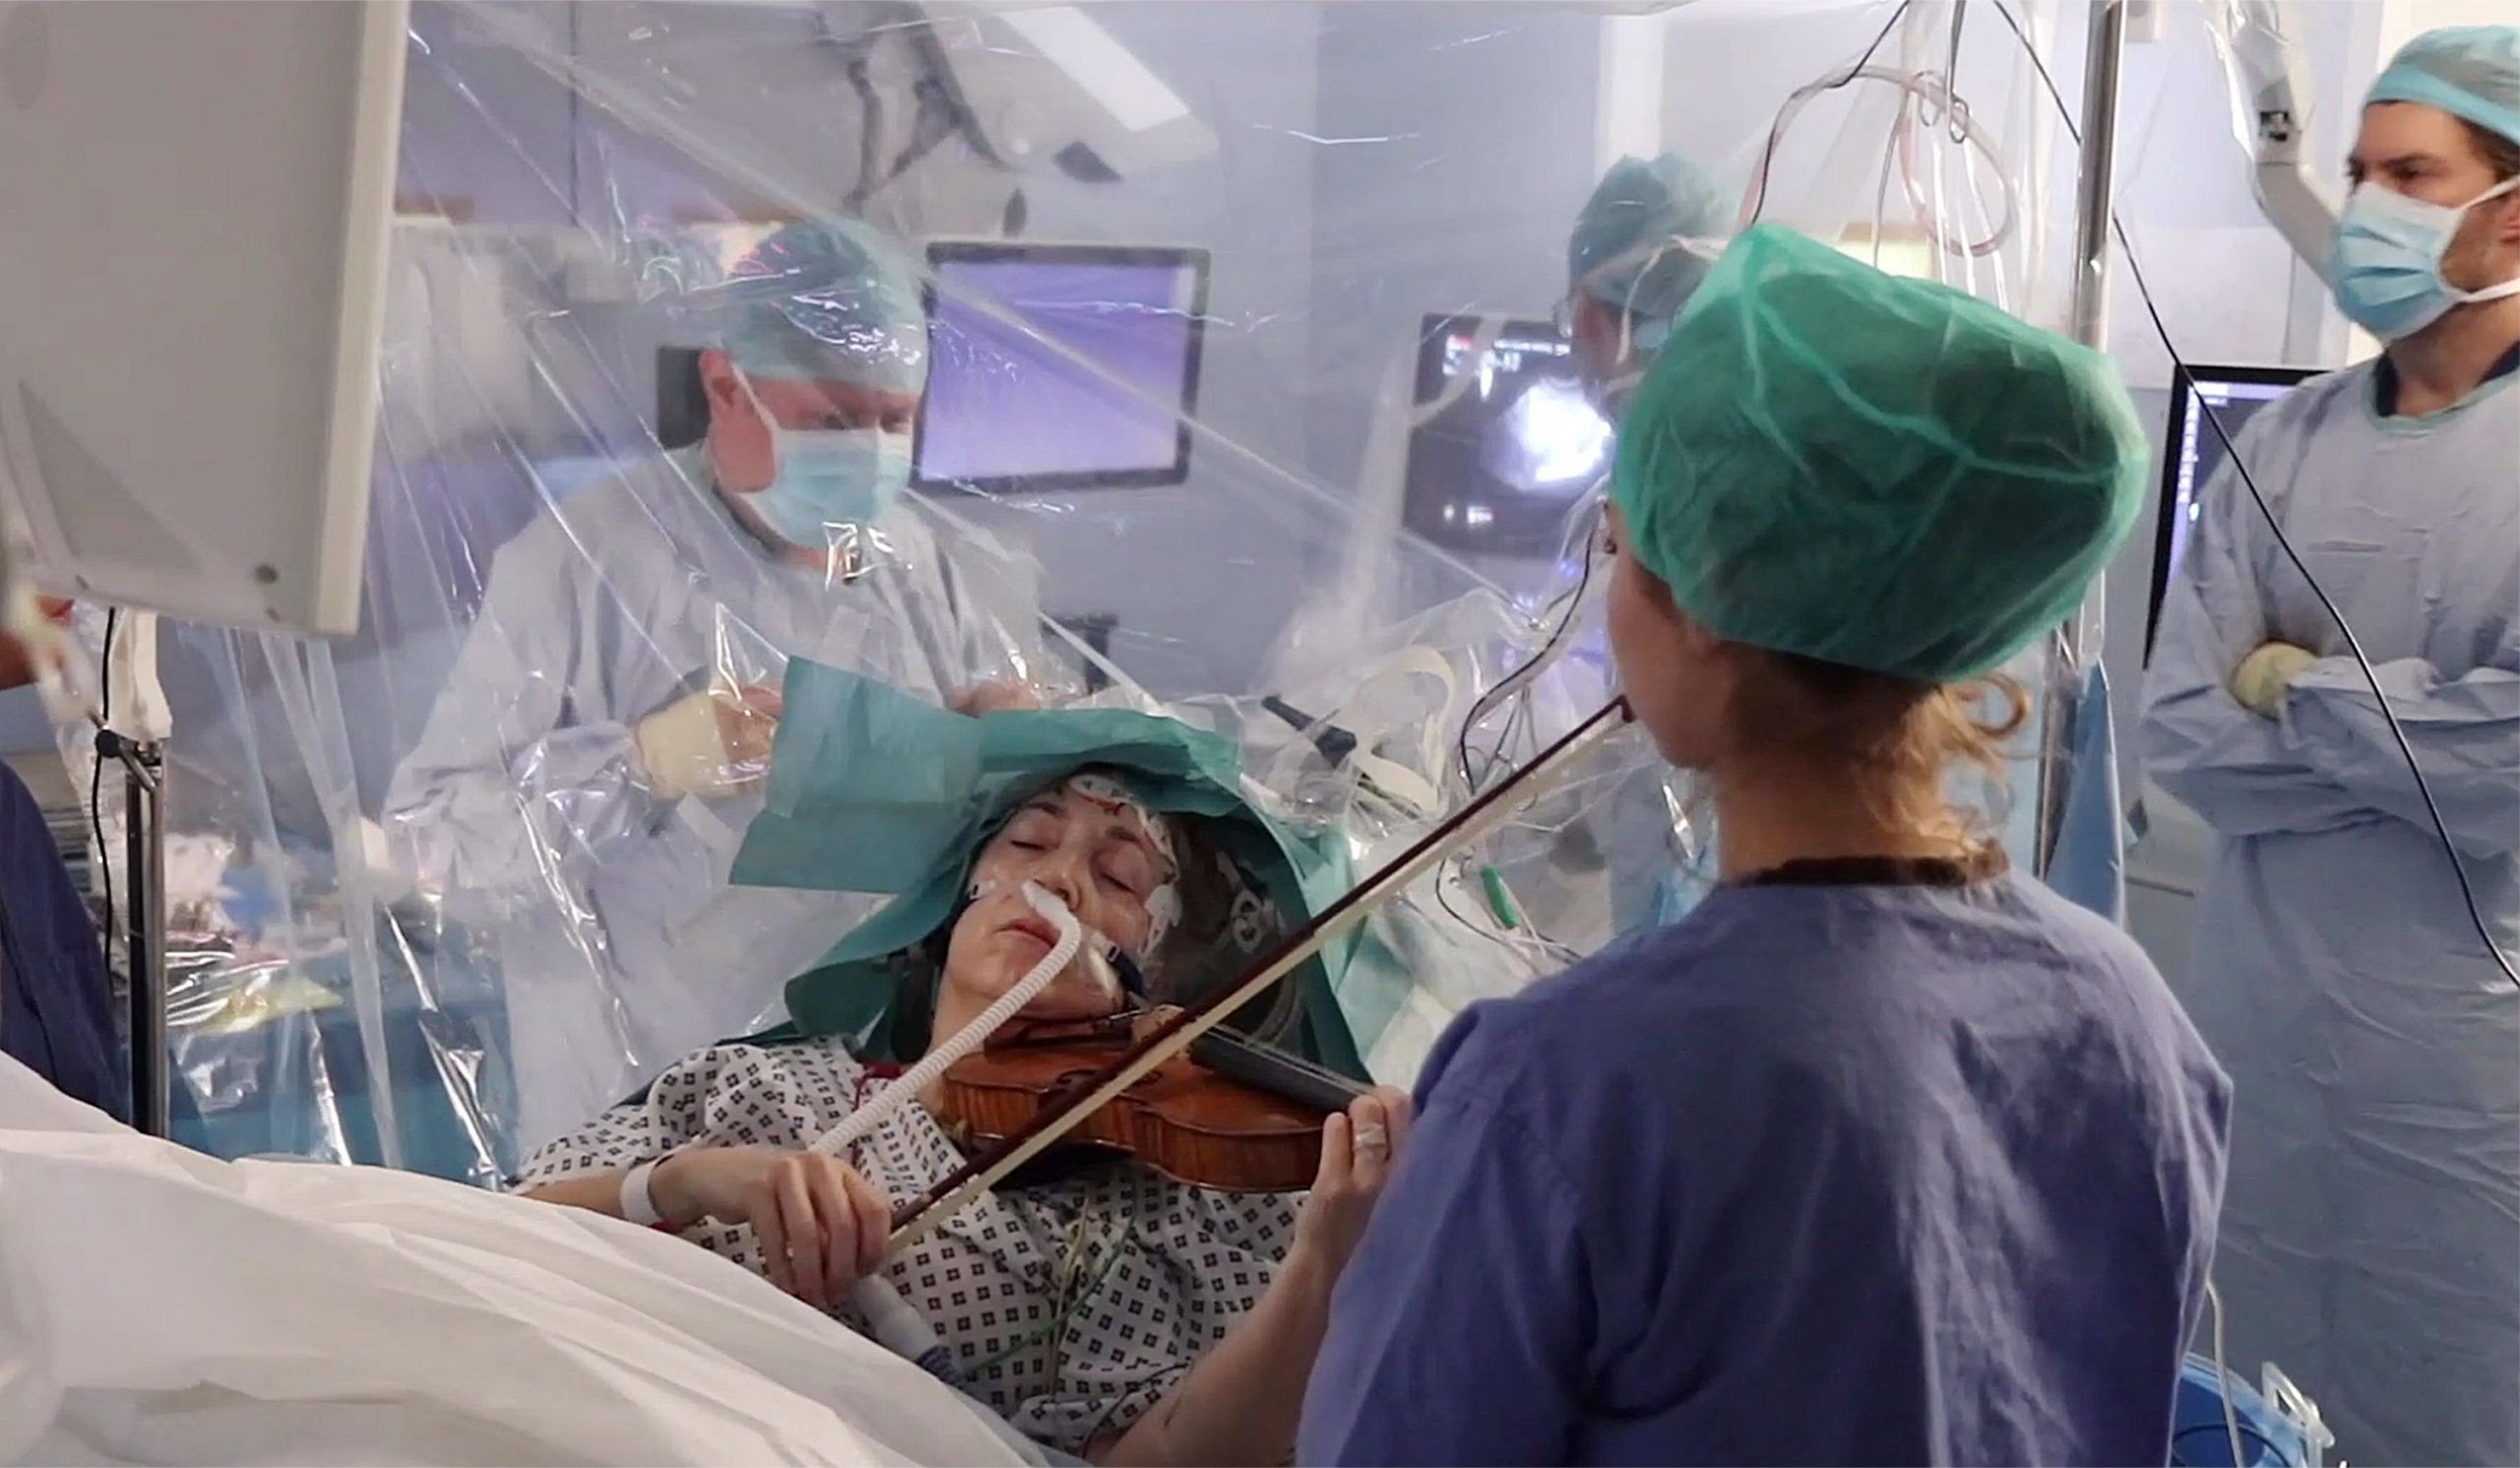 Musician Dogmar Turner playing the violin during brain surgery at King's College Hospital in London, UK.